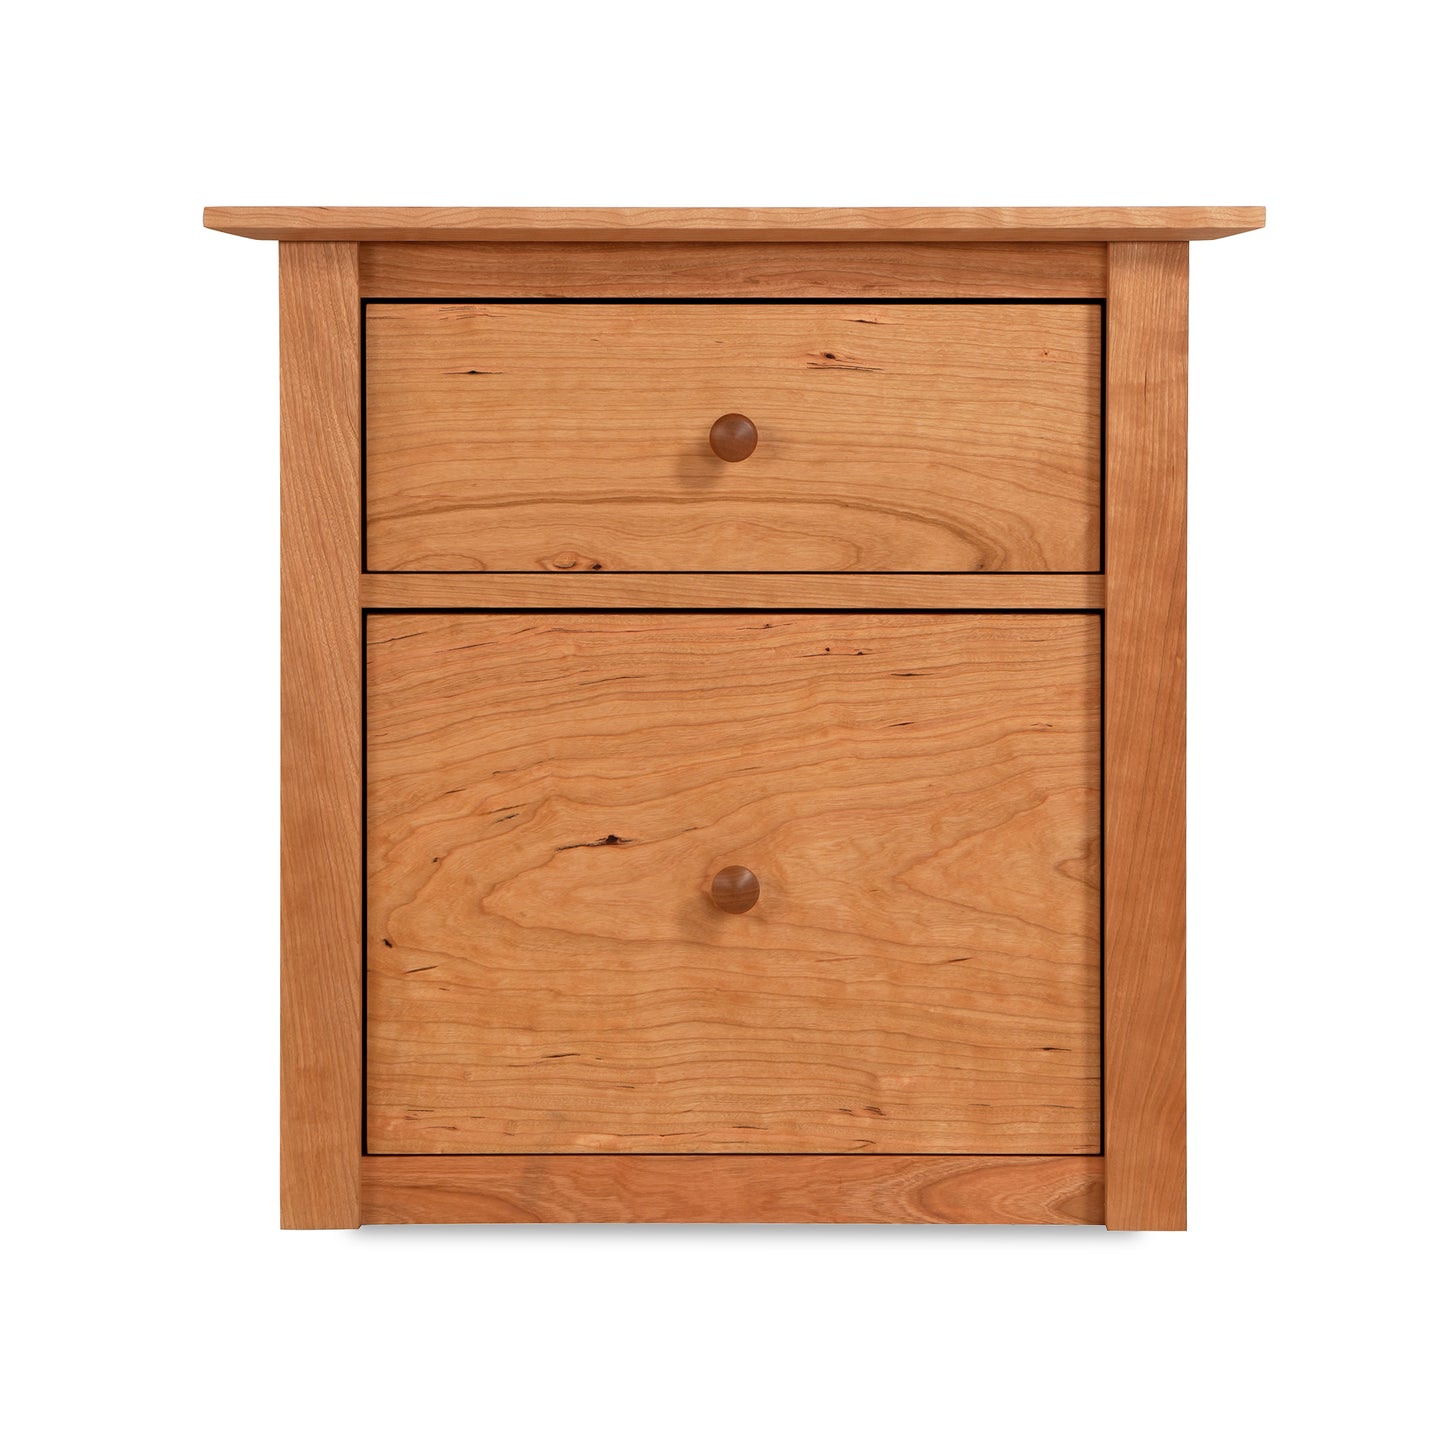 Wooden two-drawer nightstand with round knobs, isolated on a white background, inspired by Maple Corner Woodworks American Shaker File Cabinet.